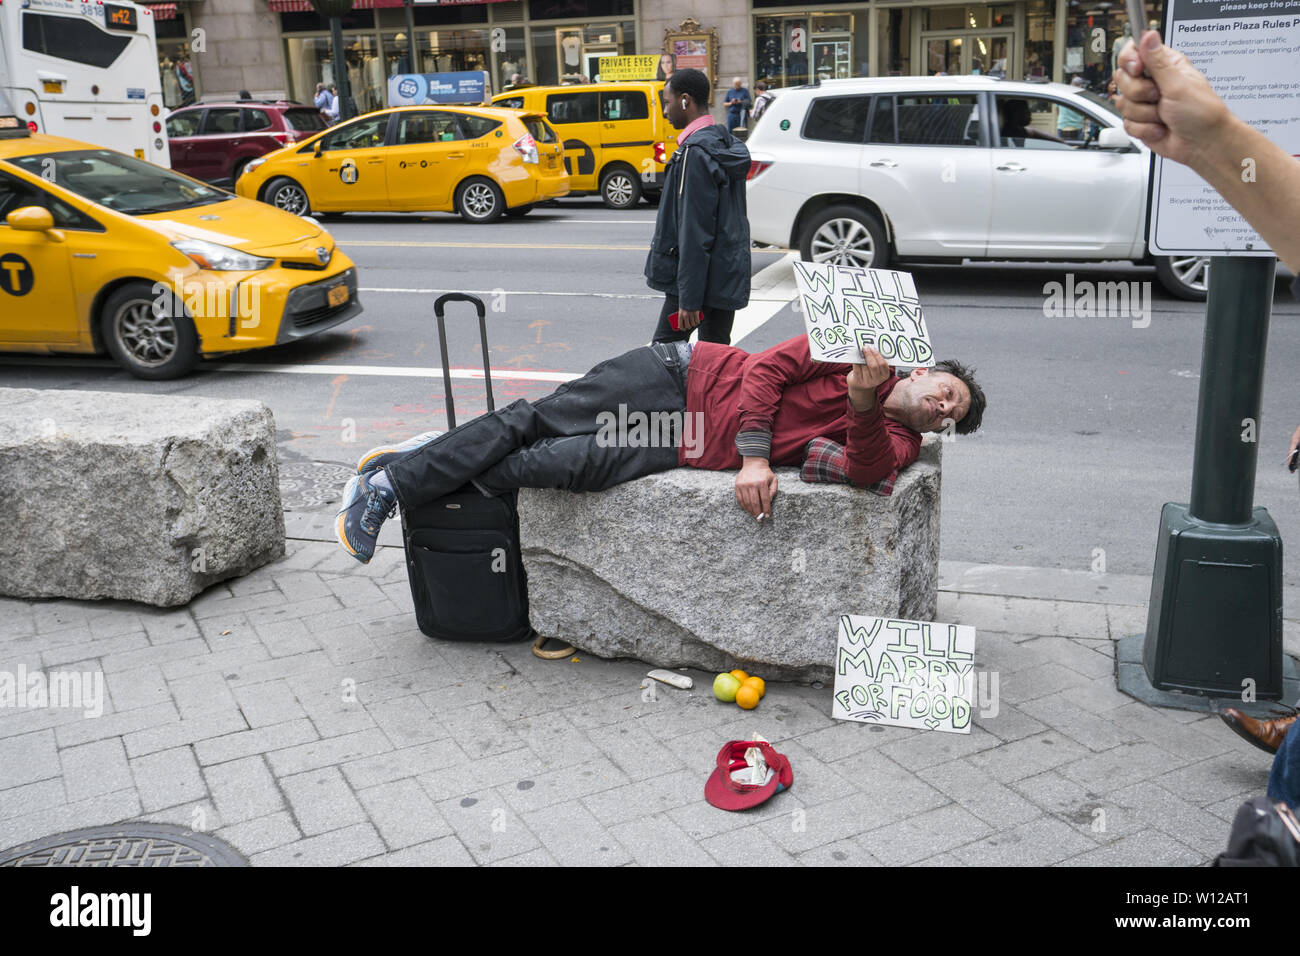 Homeless man with a sense of humor asks for help along 42nd Street in Manhattan, New York City. Stock Photo